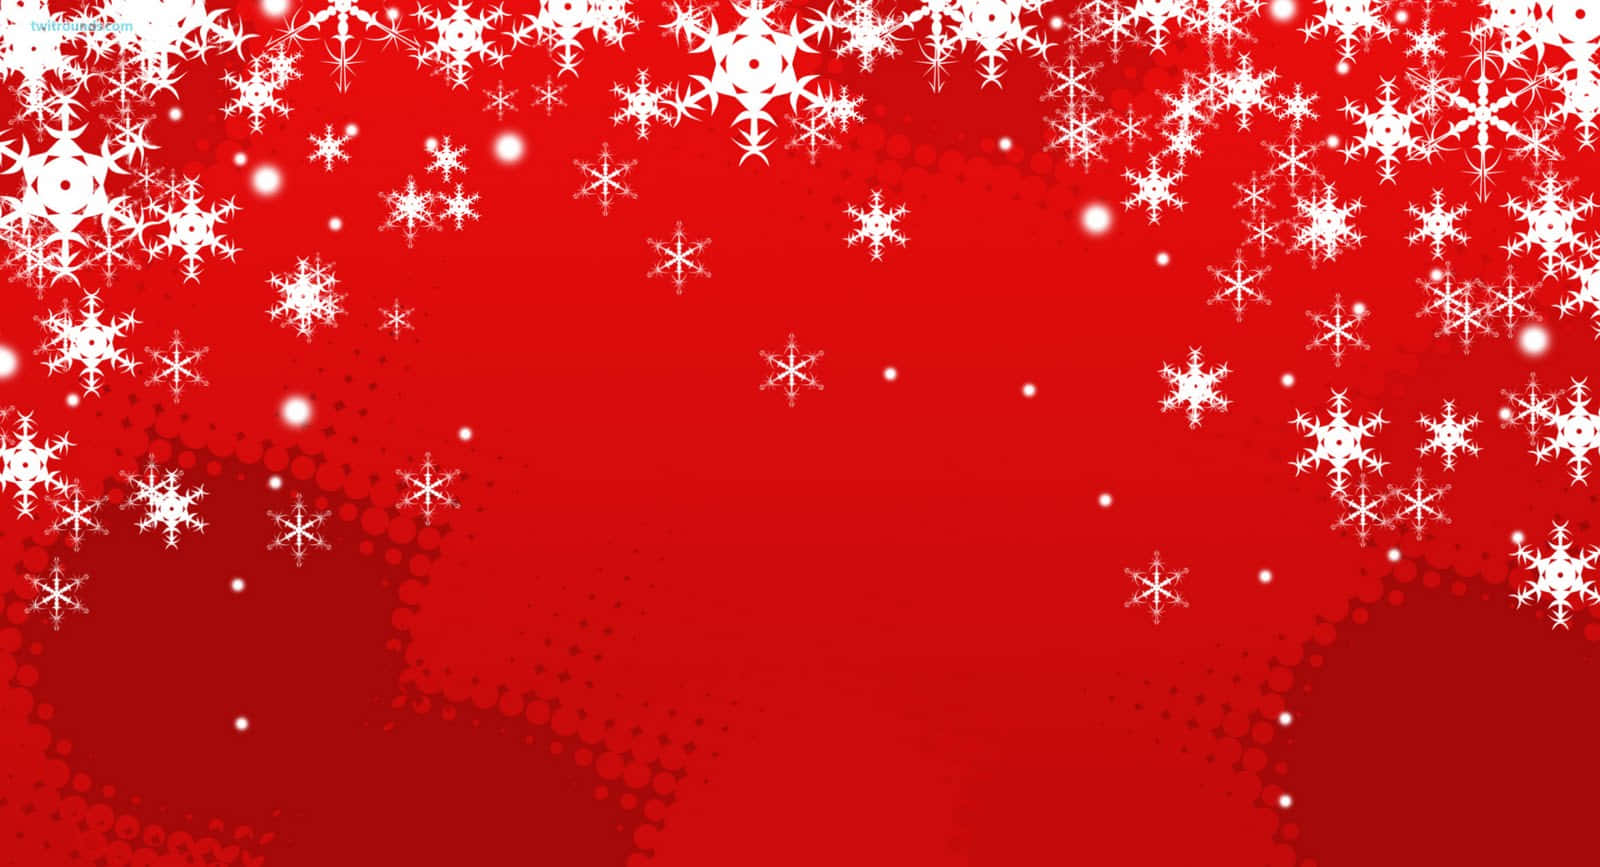 Feel the festive cheer with this beautiful red aesthetic Christmas wallpaper Wallpaper